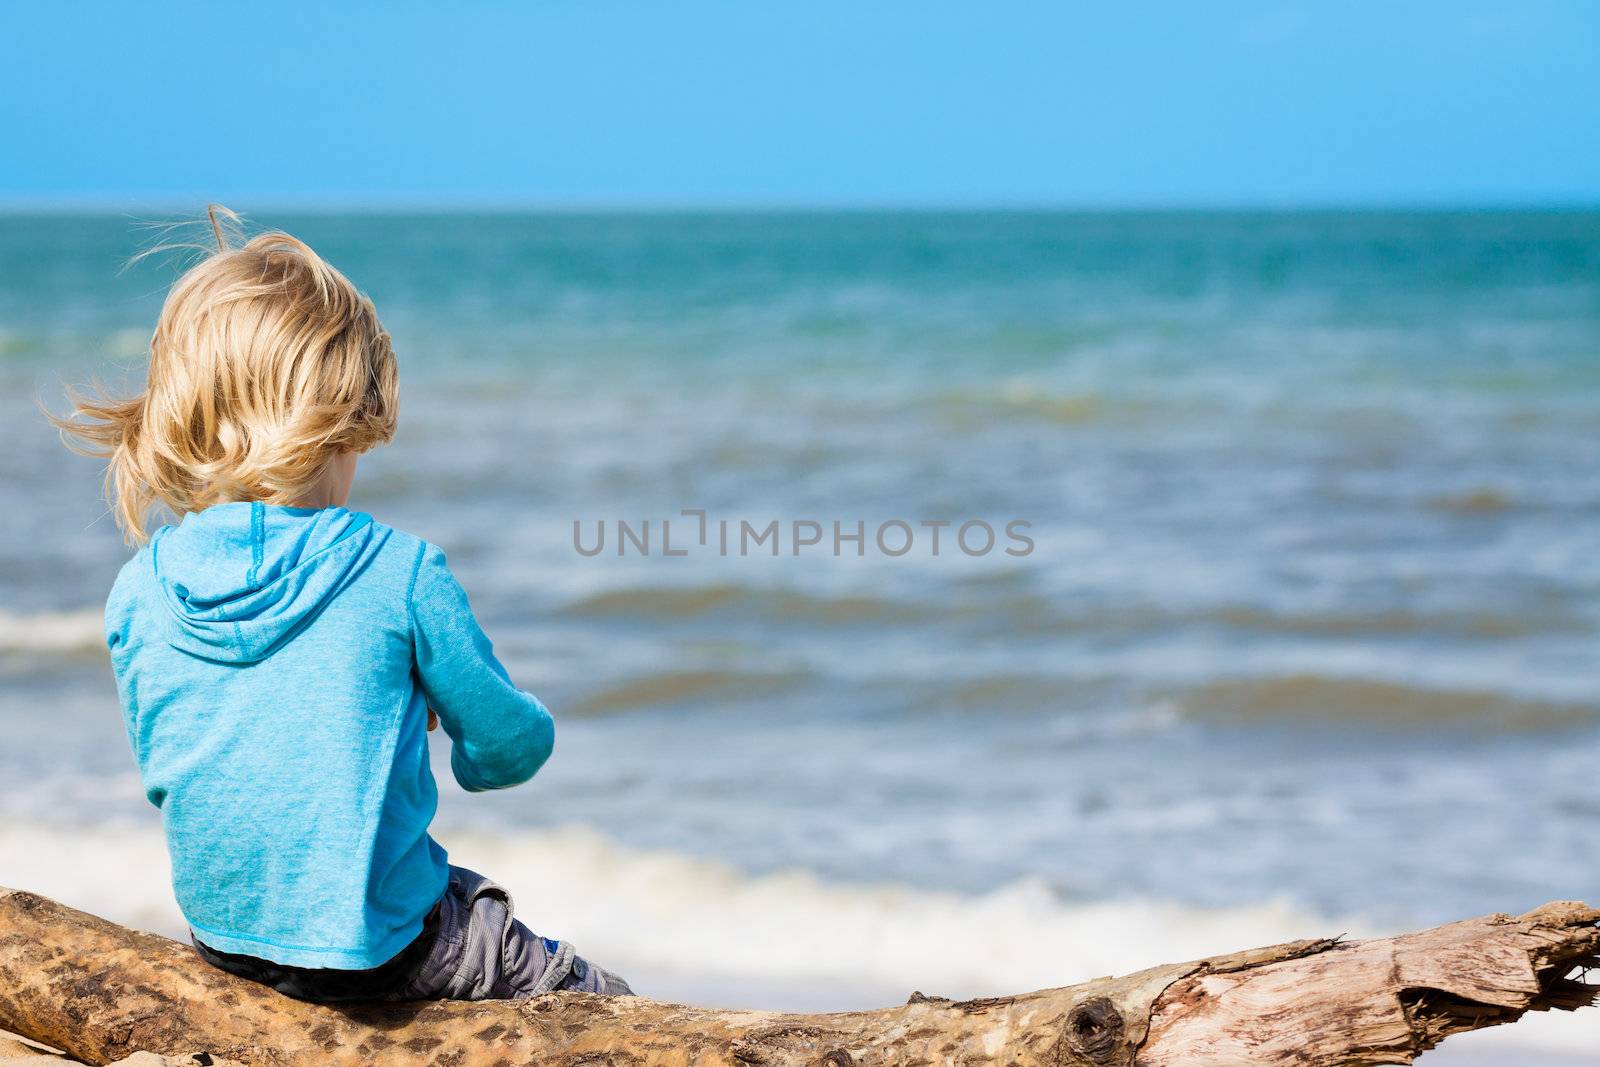 A young carefree child sitting on a log at the beach.